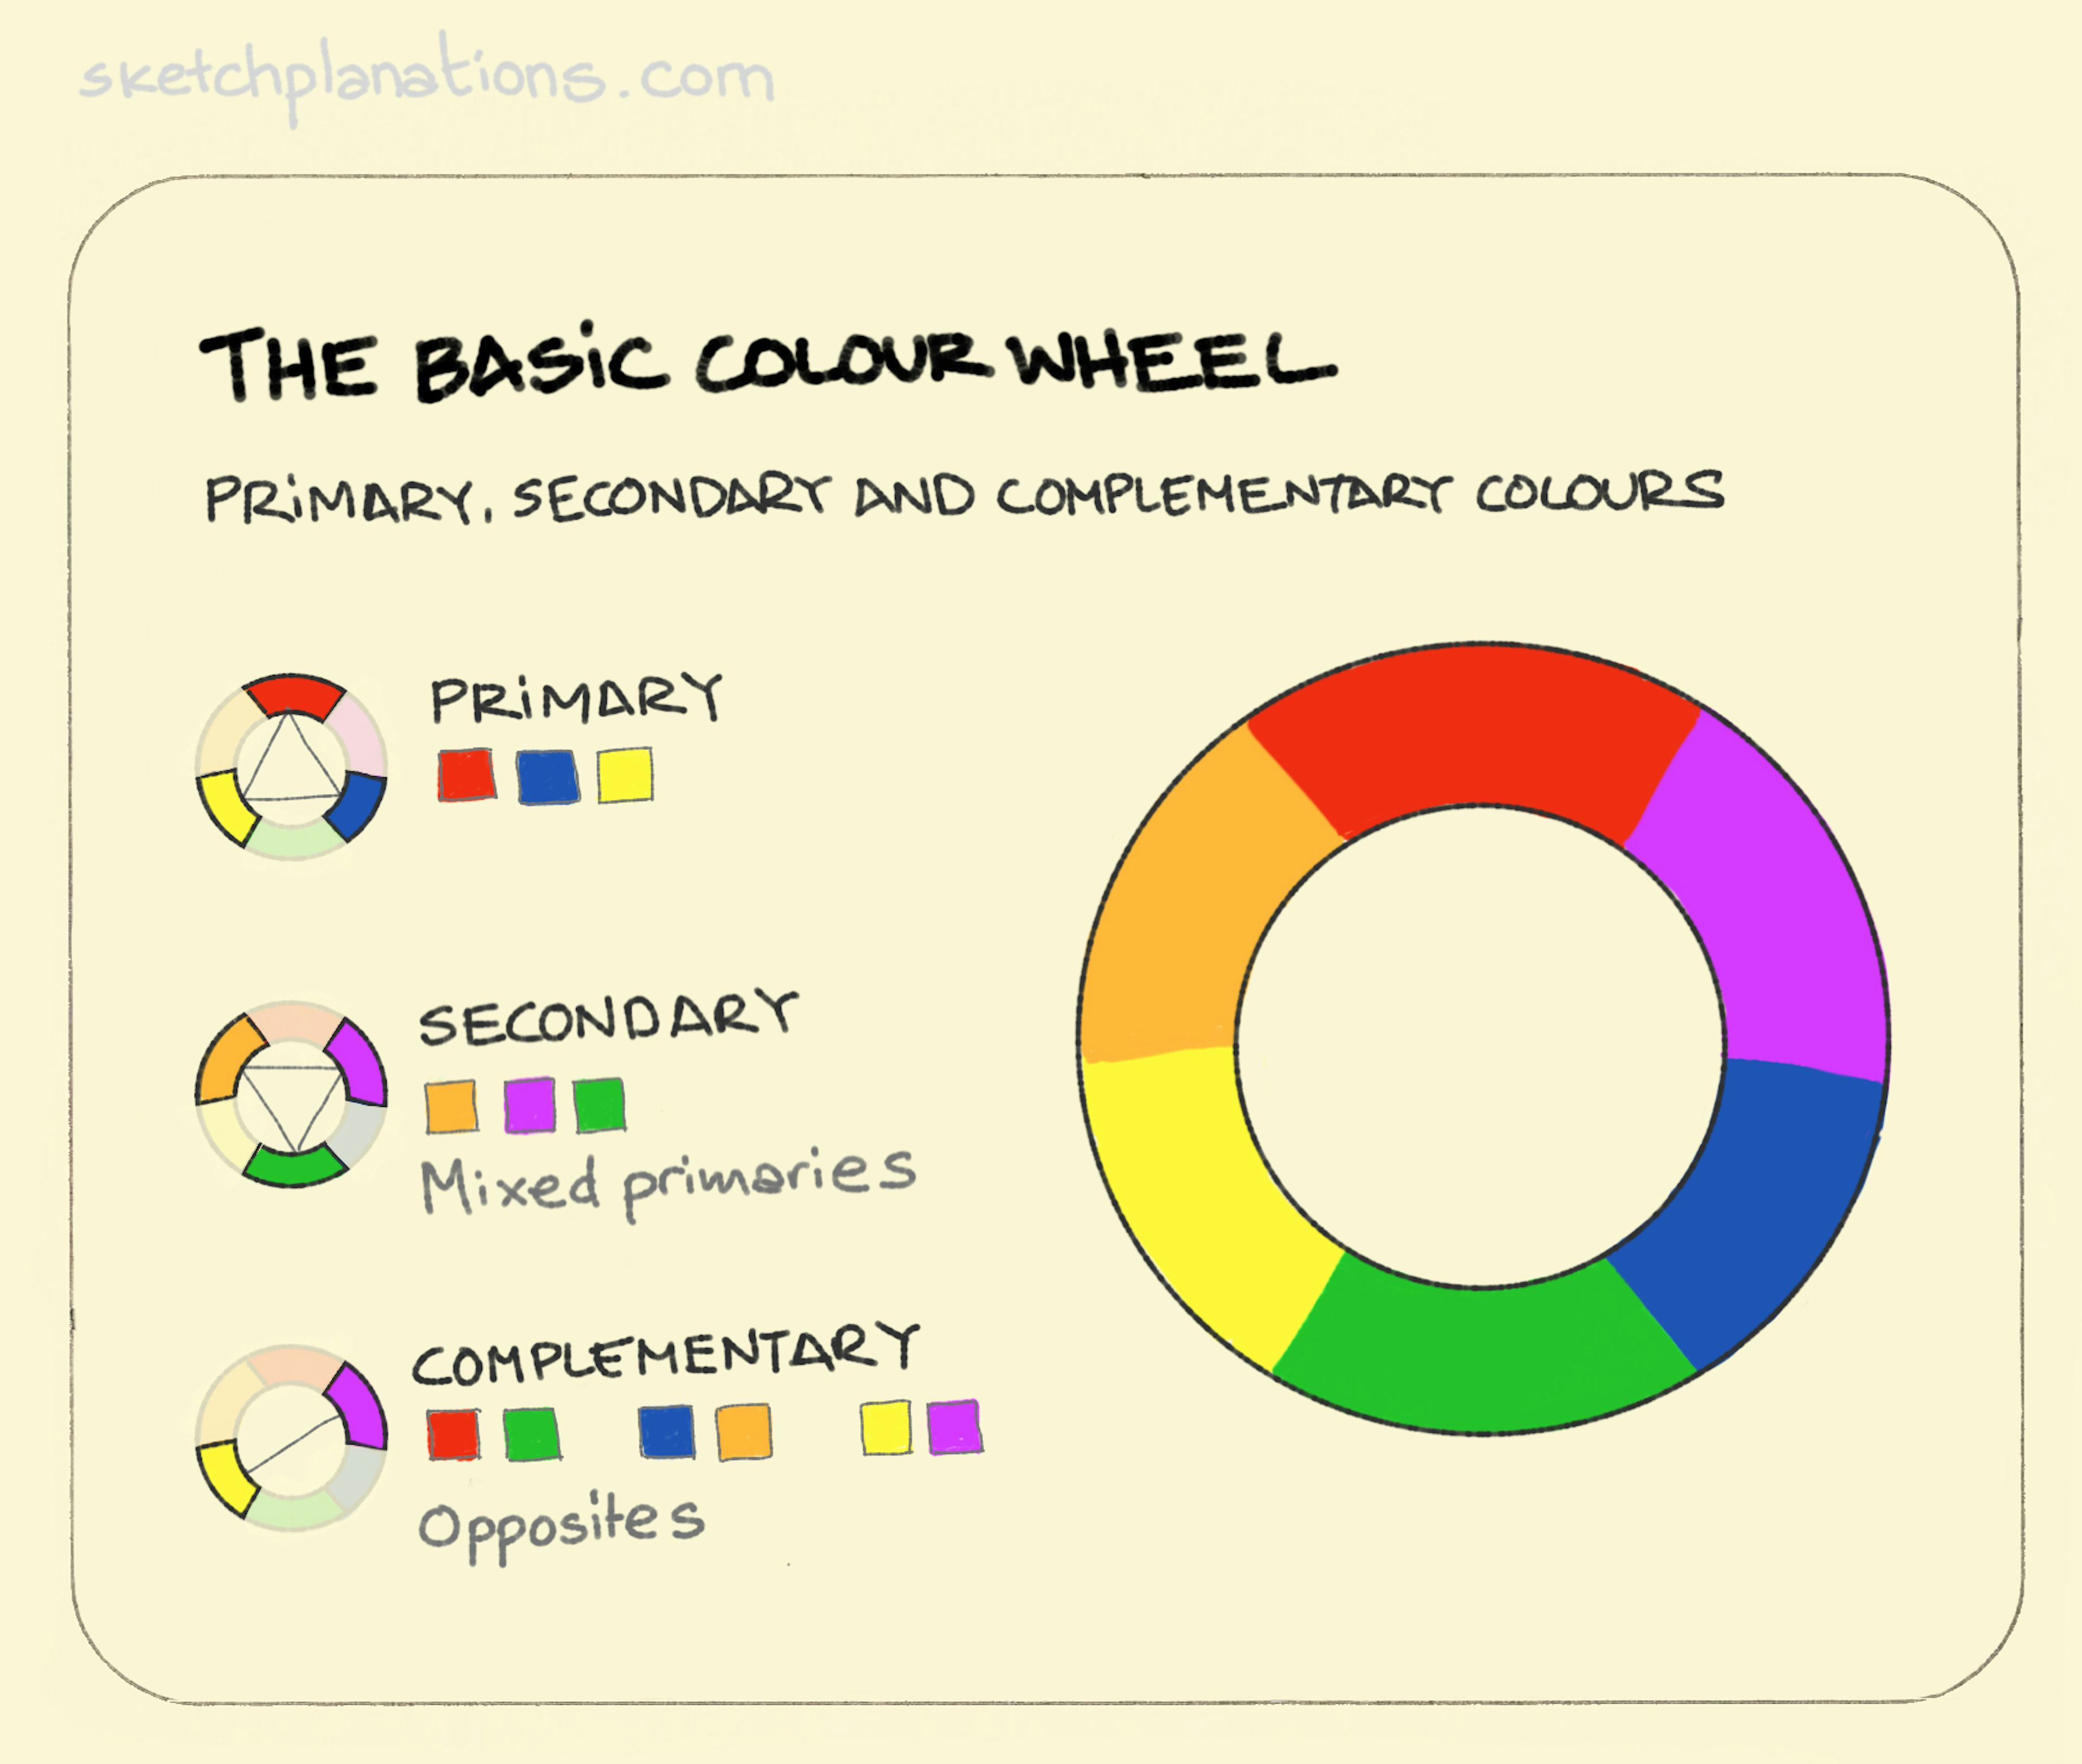 The basic colour wheel illustration: a doughnut-shaped colour wheel shows the 3 primary colours, with secondary colours sandwiched in-between. Complementary colours are then shown as those that sit opposite each other. 